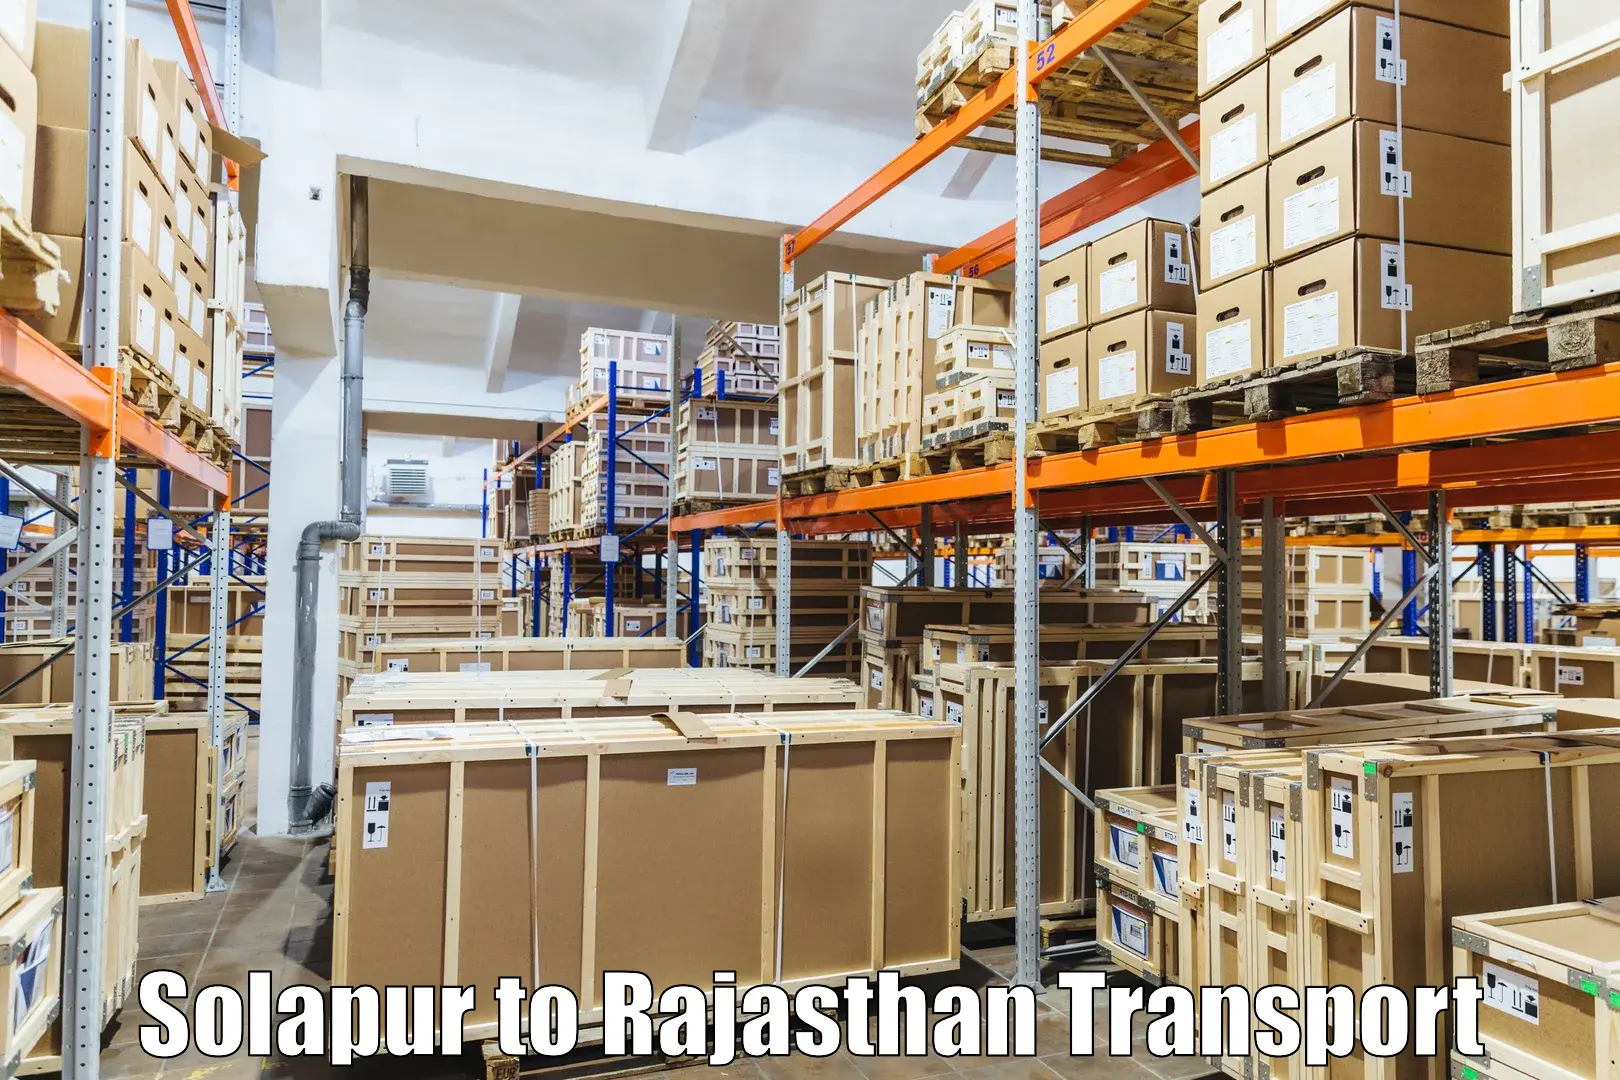 Air freight transport services Solapur to Udaipur